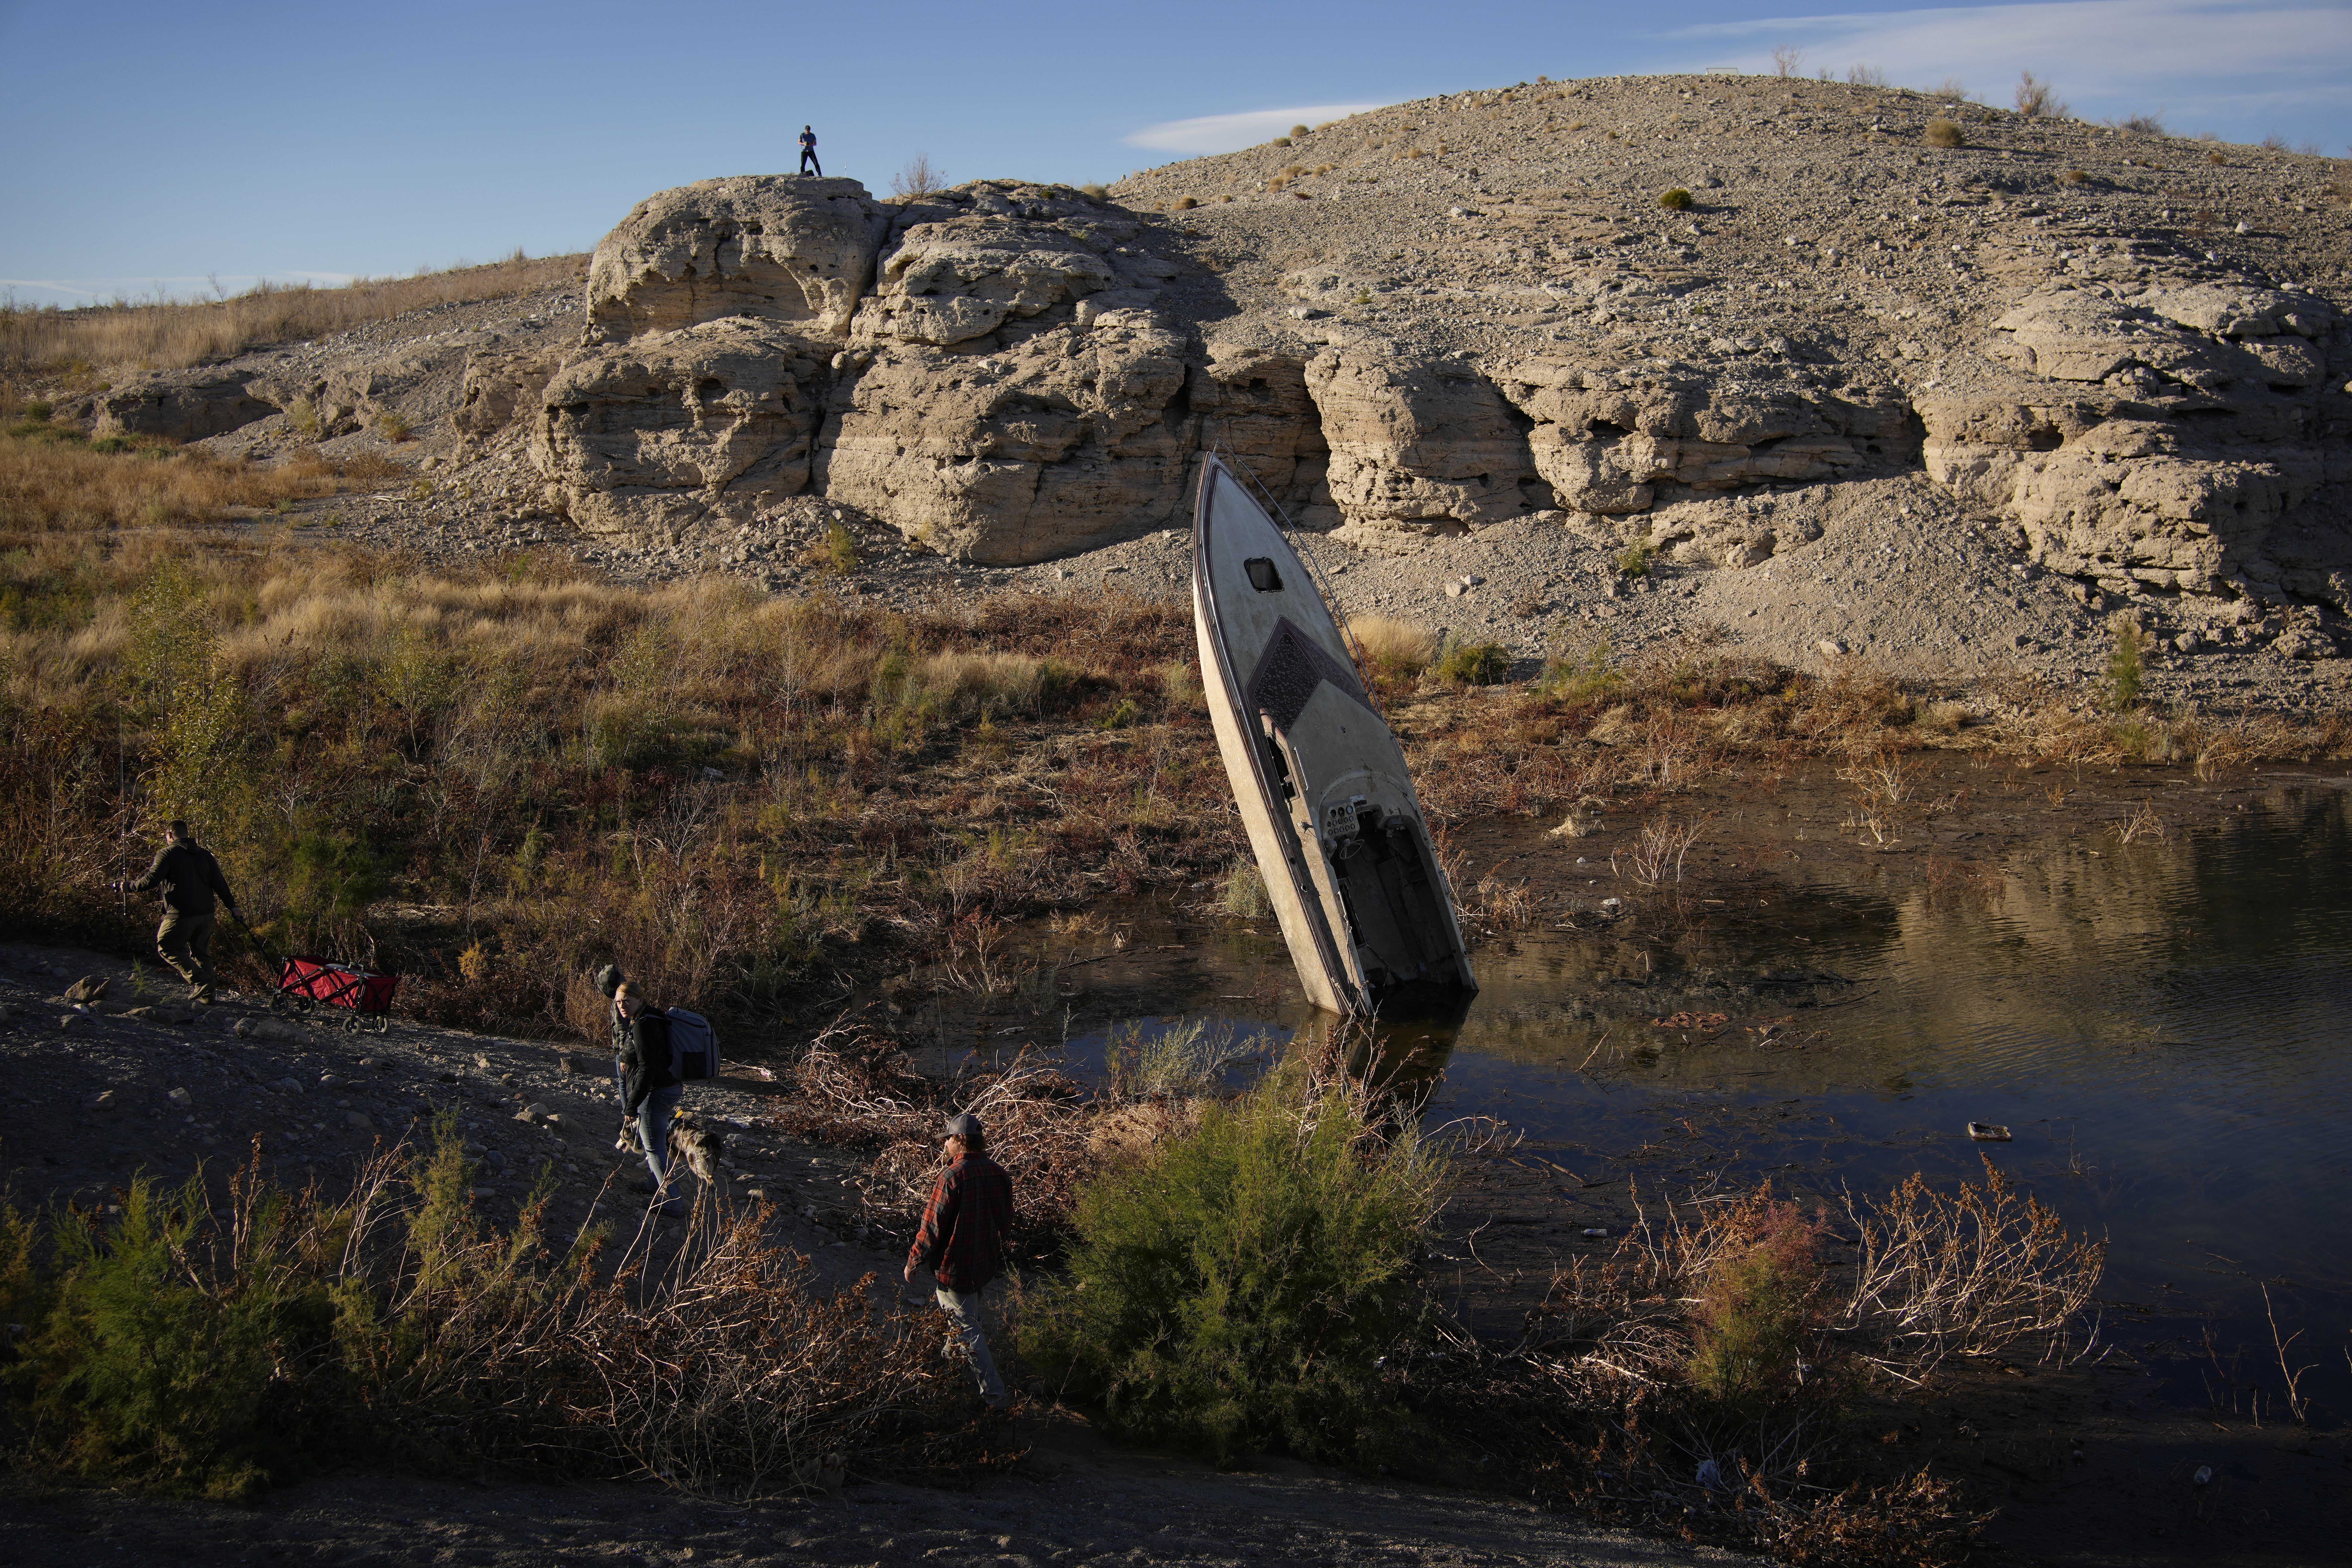 People walk by a formerly sunken boat standing upright into the air with its stern buried in the mud along the shoreline of Lake Mead.